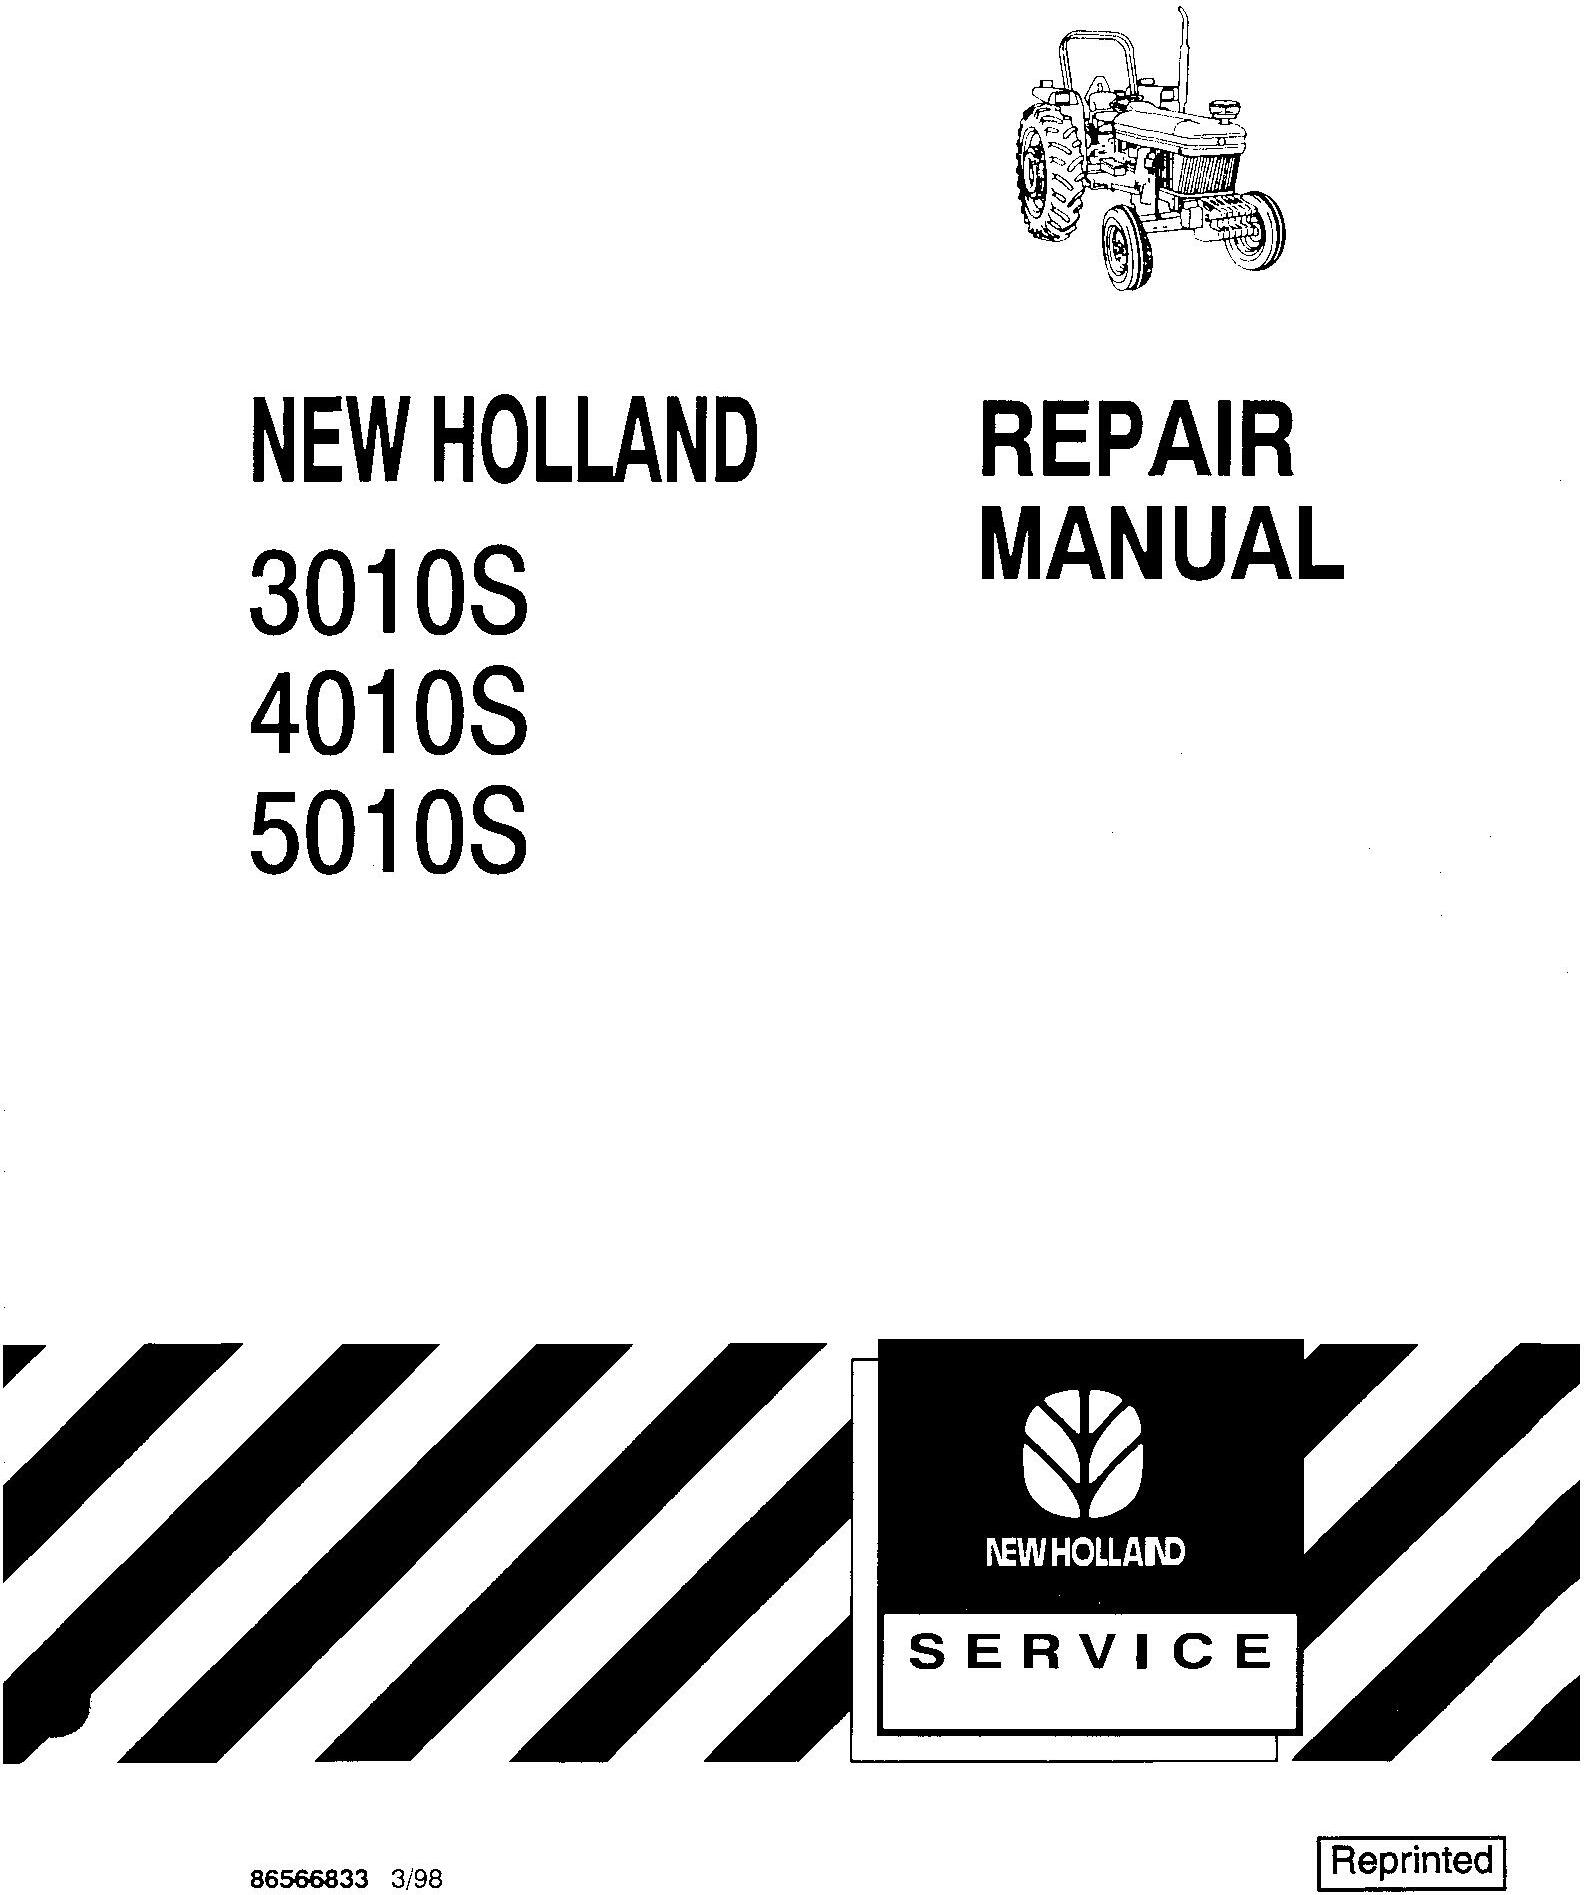 New Holland 3010S, 4010S, 5010S Tractor Service Manual